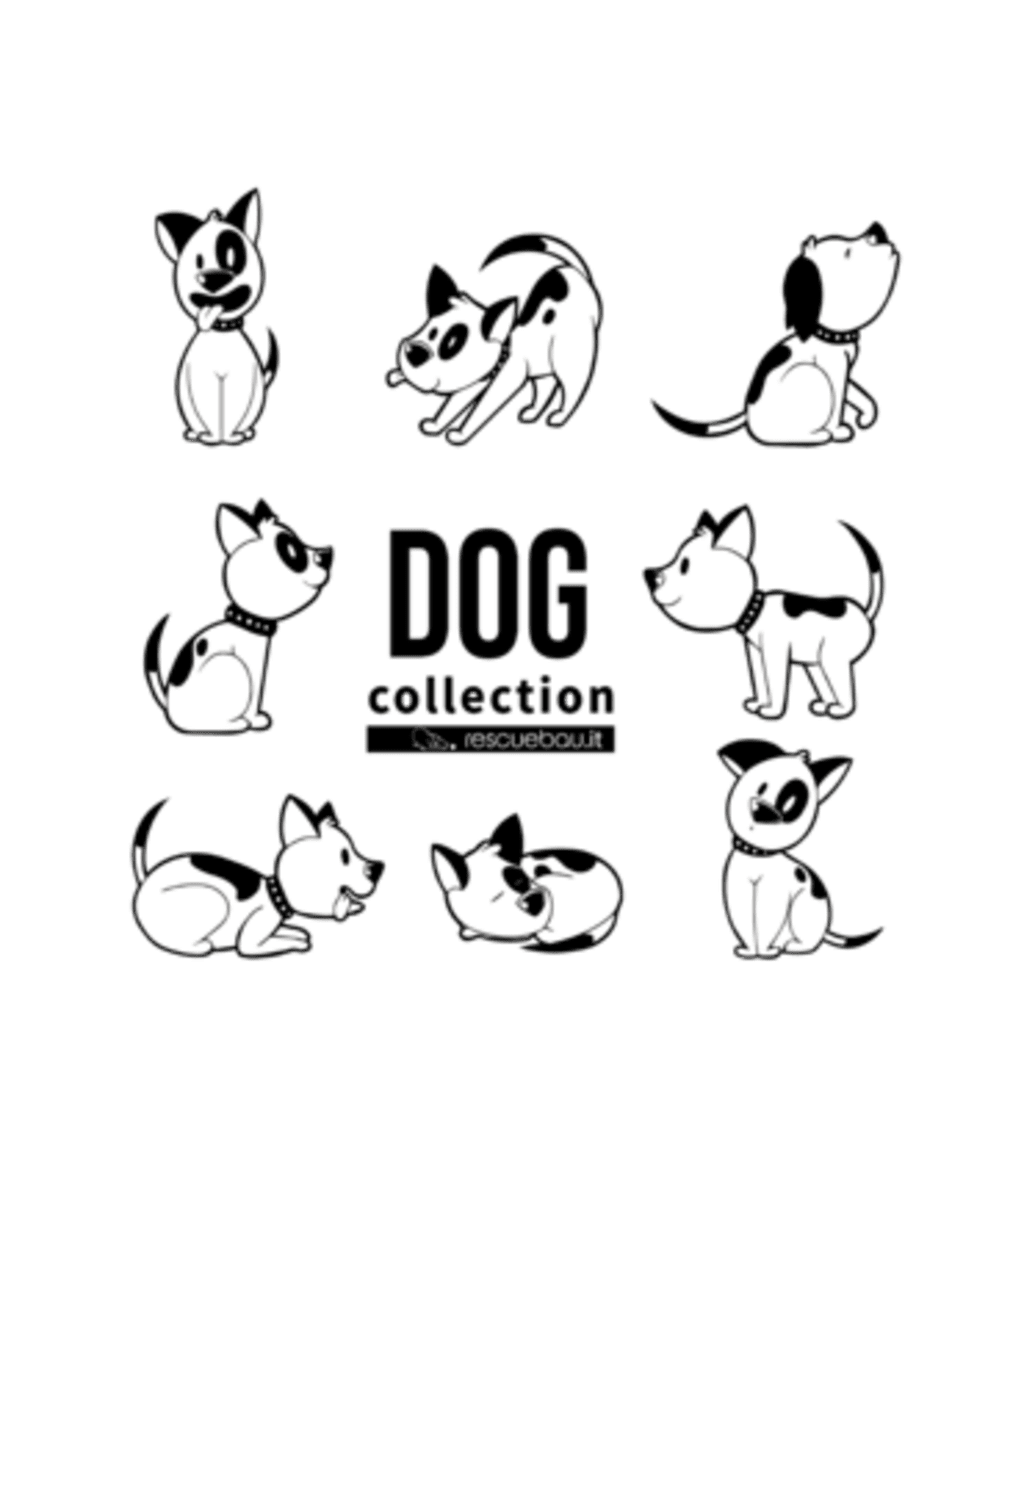 DOG COLLECTION